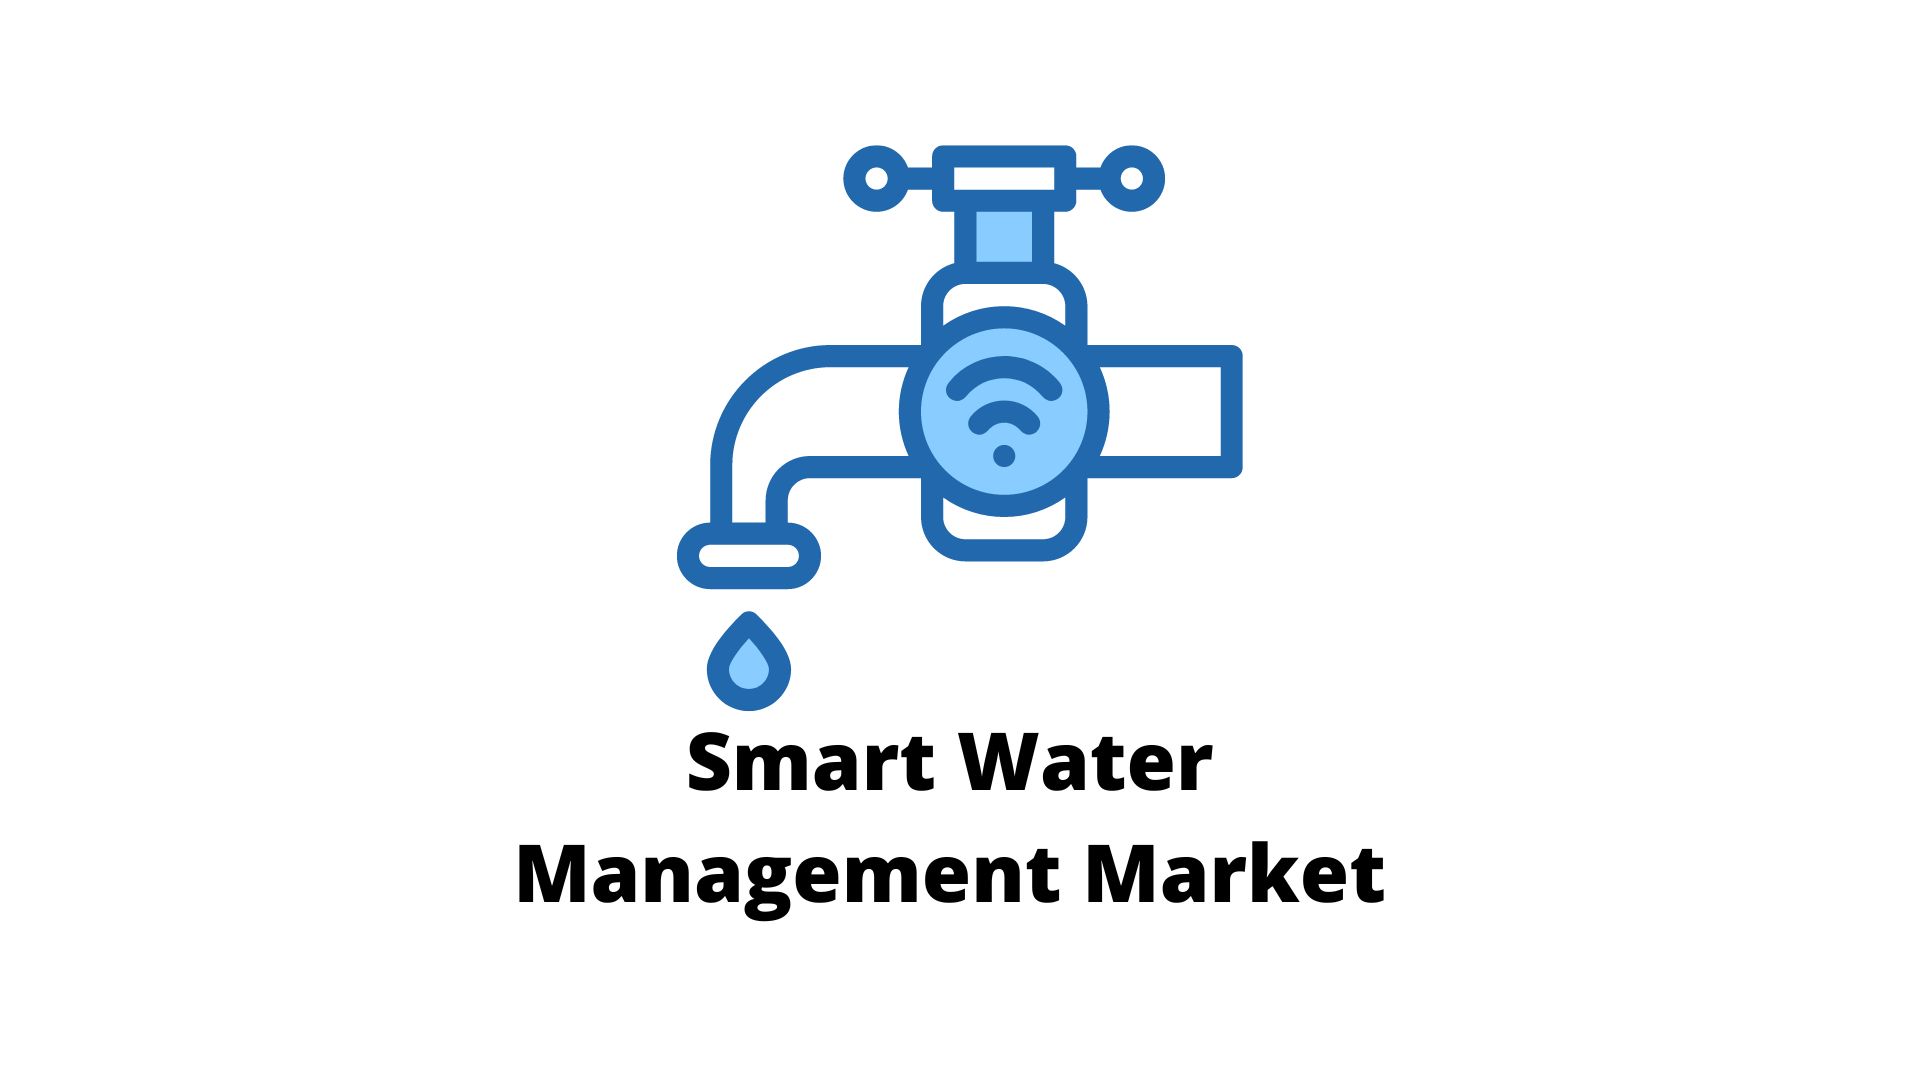 Smart Water Management Market Is Encouraged to Reach USD 45.1 Billion by 2032 at a CAGR of 11.5%